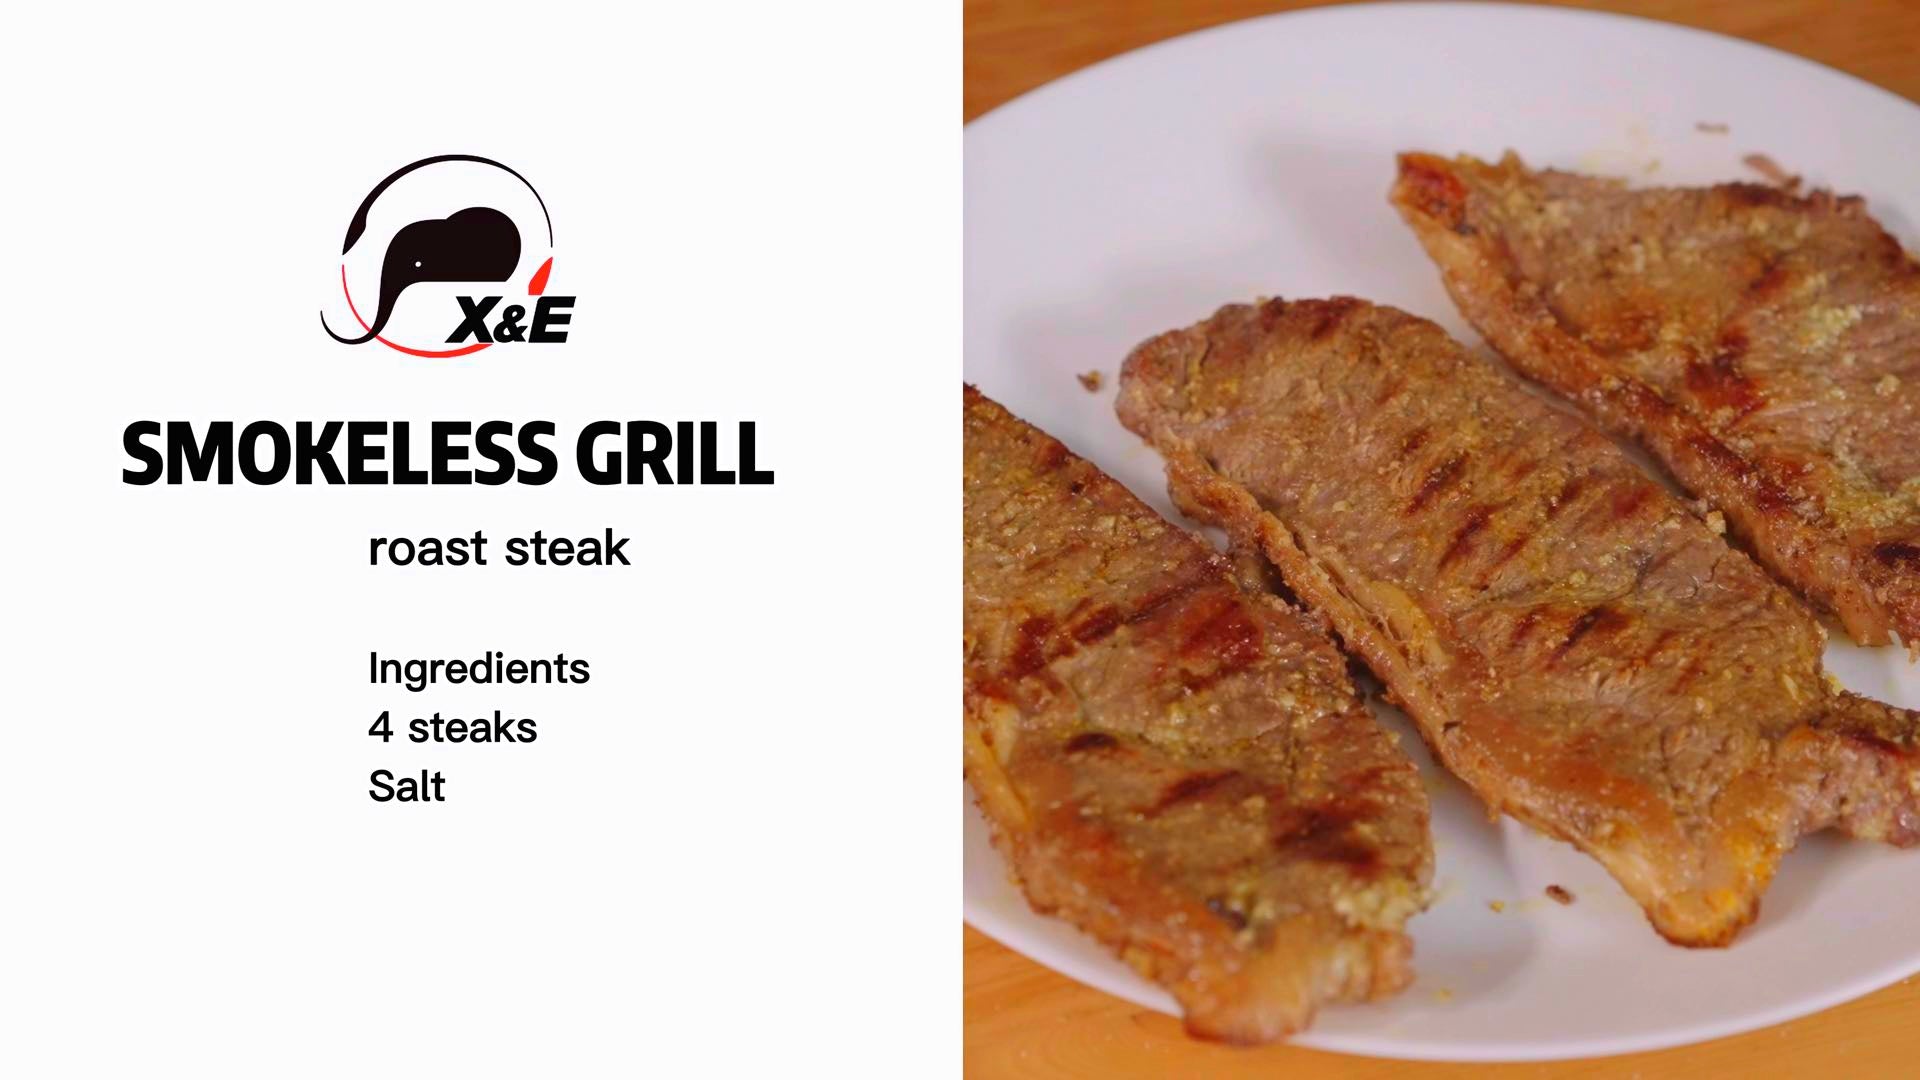 Grilling steaks on the X&E smokeless grill is quick and easy, allowing you to enjoy restaurant-quality steaks in the comfort of your own home.